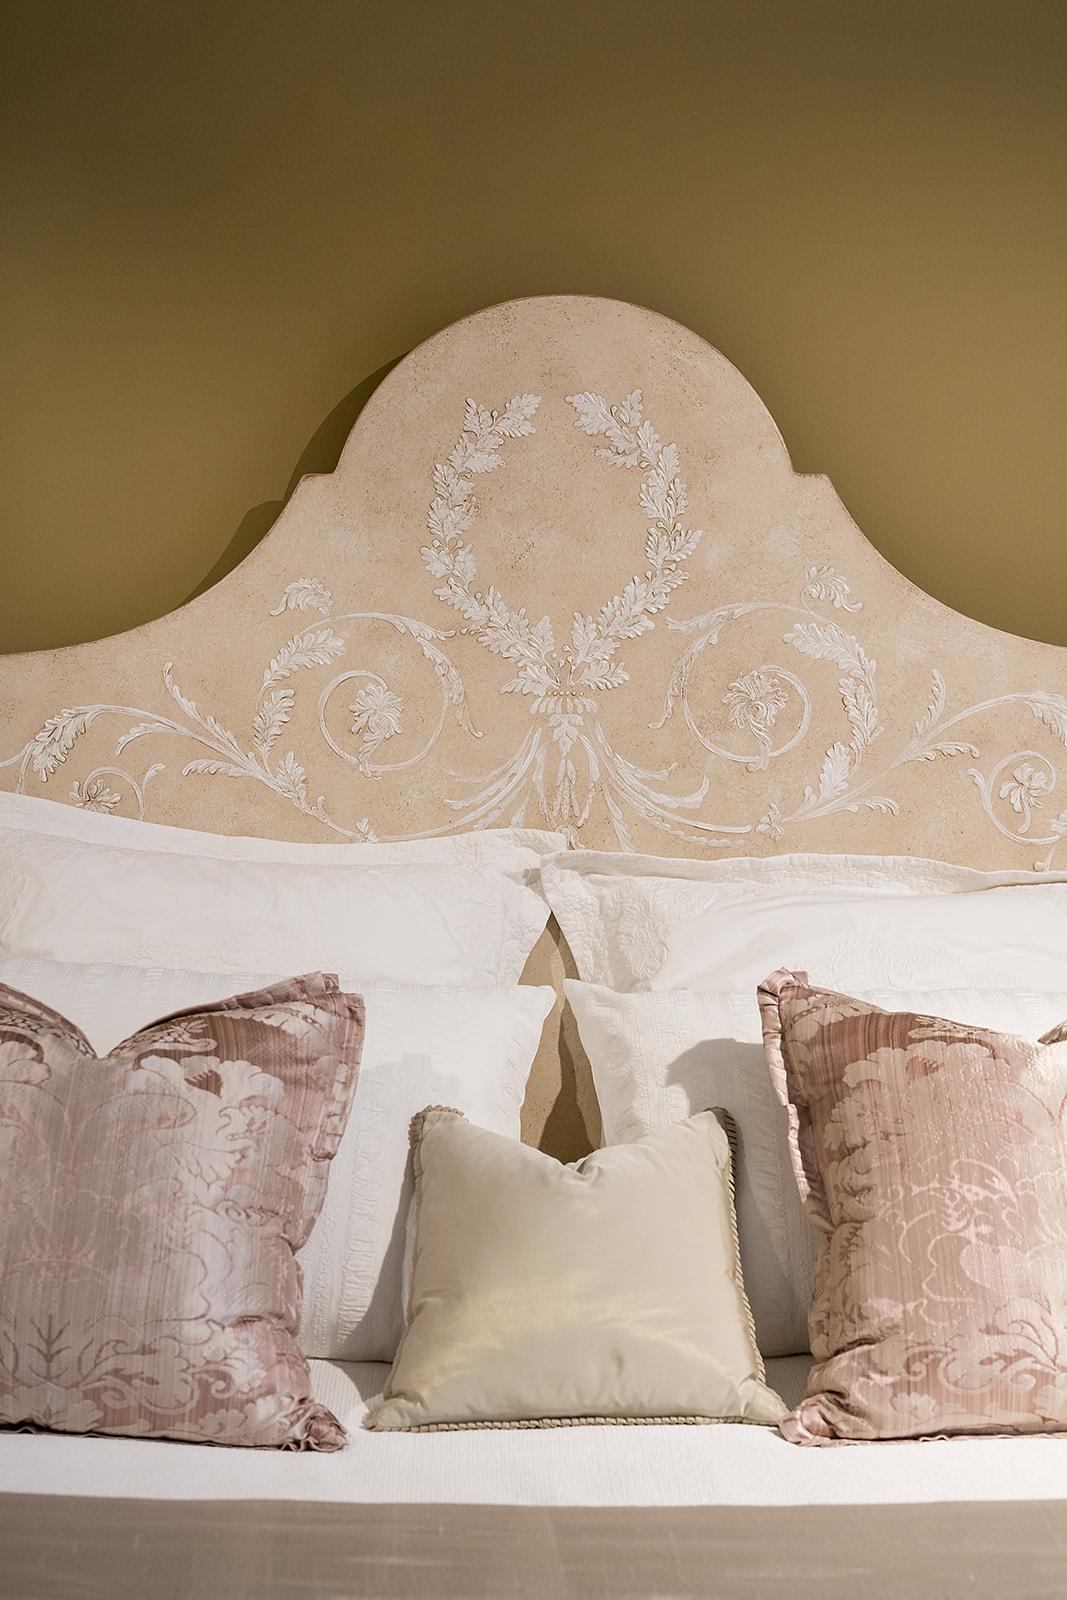 From our Hand-Painted Furniture Collection, we are pleased to introduce you to our Light Taupe Roma Bed. 

Sometimes a room calls for more subdued furniture.

The subtle raised gesso design against the slightly darker base color on this Roma Bed